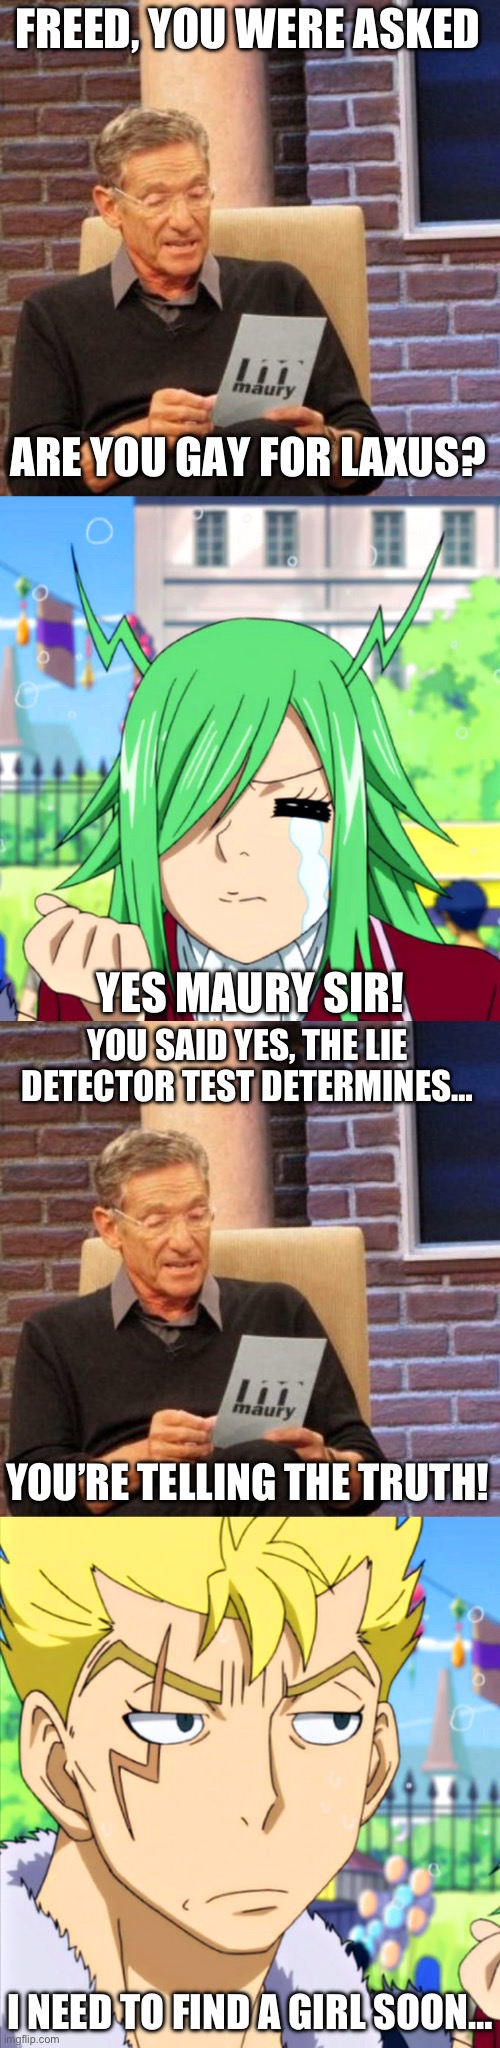 Maury Lie Detector Part 3, Is Freed Gay for Laxus? | FREED, YOU WERE ASKED; ARE YOU GAY FOR LAXUS? YES MAURY SIR! YOU SAID YES, THE LIE DETECTOR TEST DETERMINES…; YOU’RE TELLING THE TRUTH! I NEED TO FIND A GIRL SOON… | image tagged in memes,maury lie detector,fairy tail,freed justine,laxus,fraxus | made w/ Imgflip meme maker